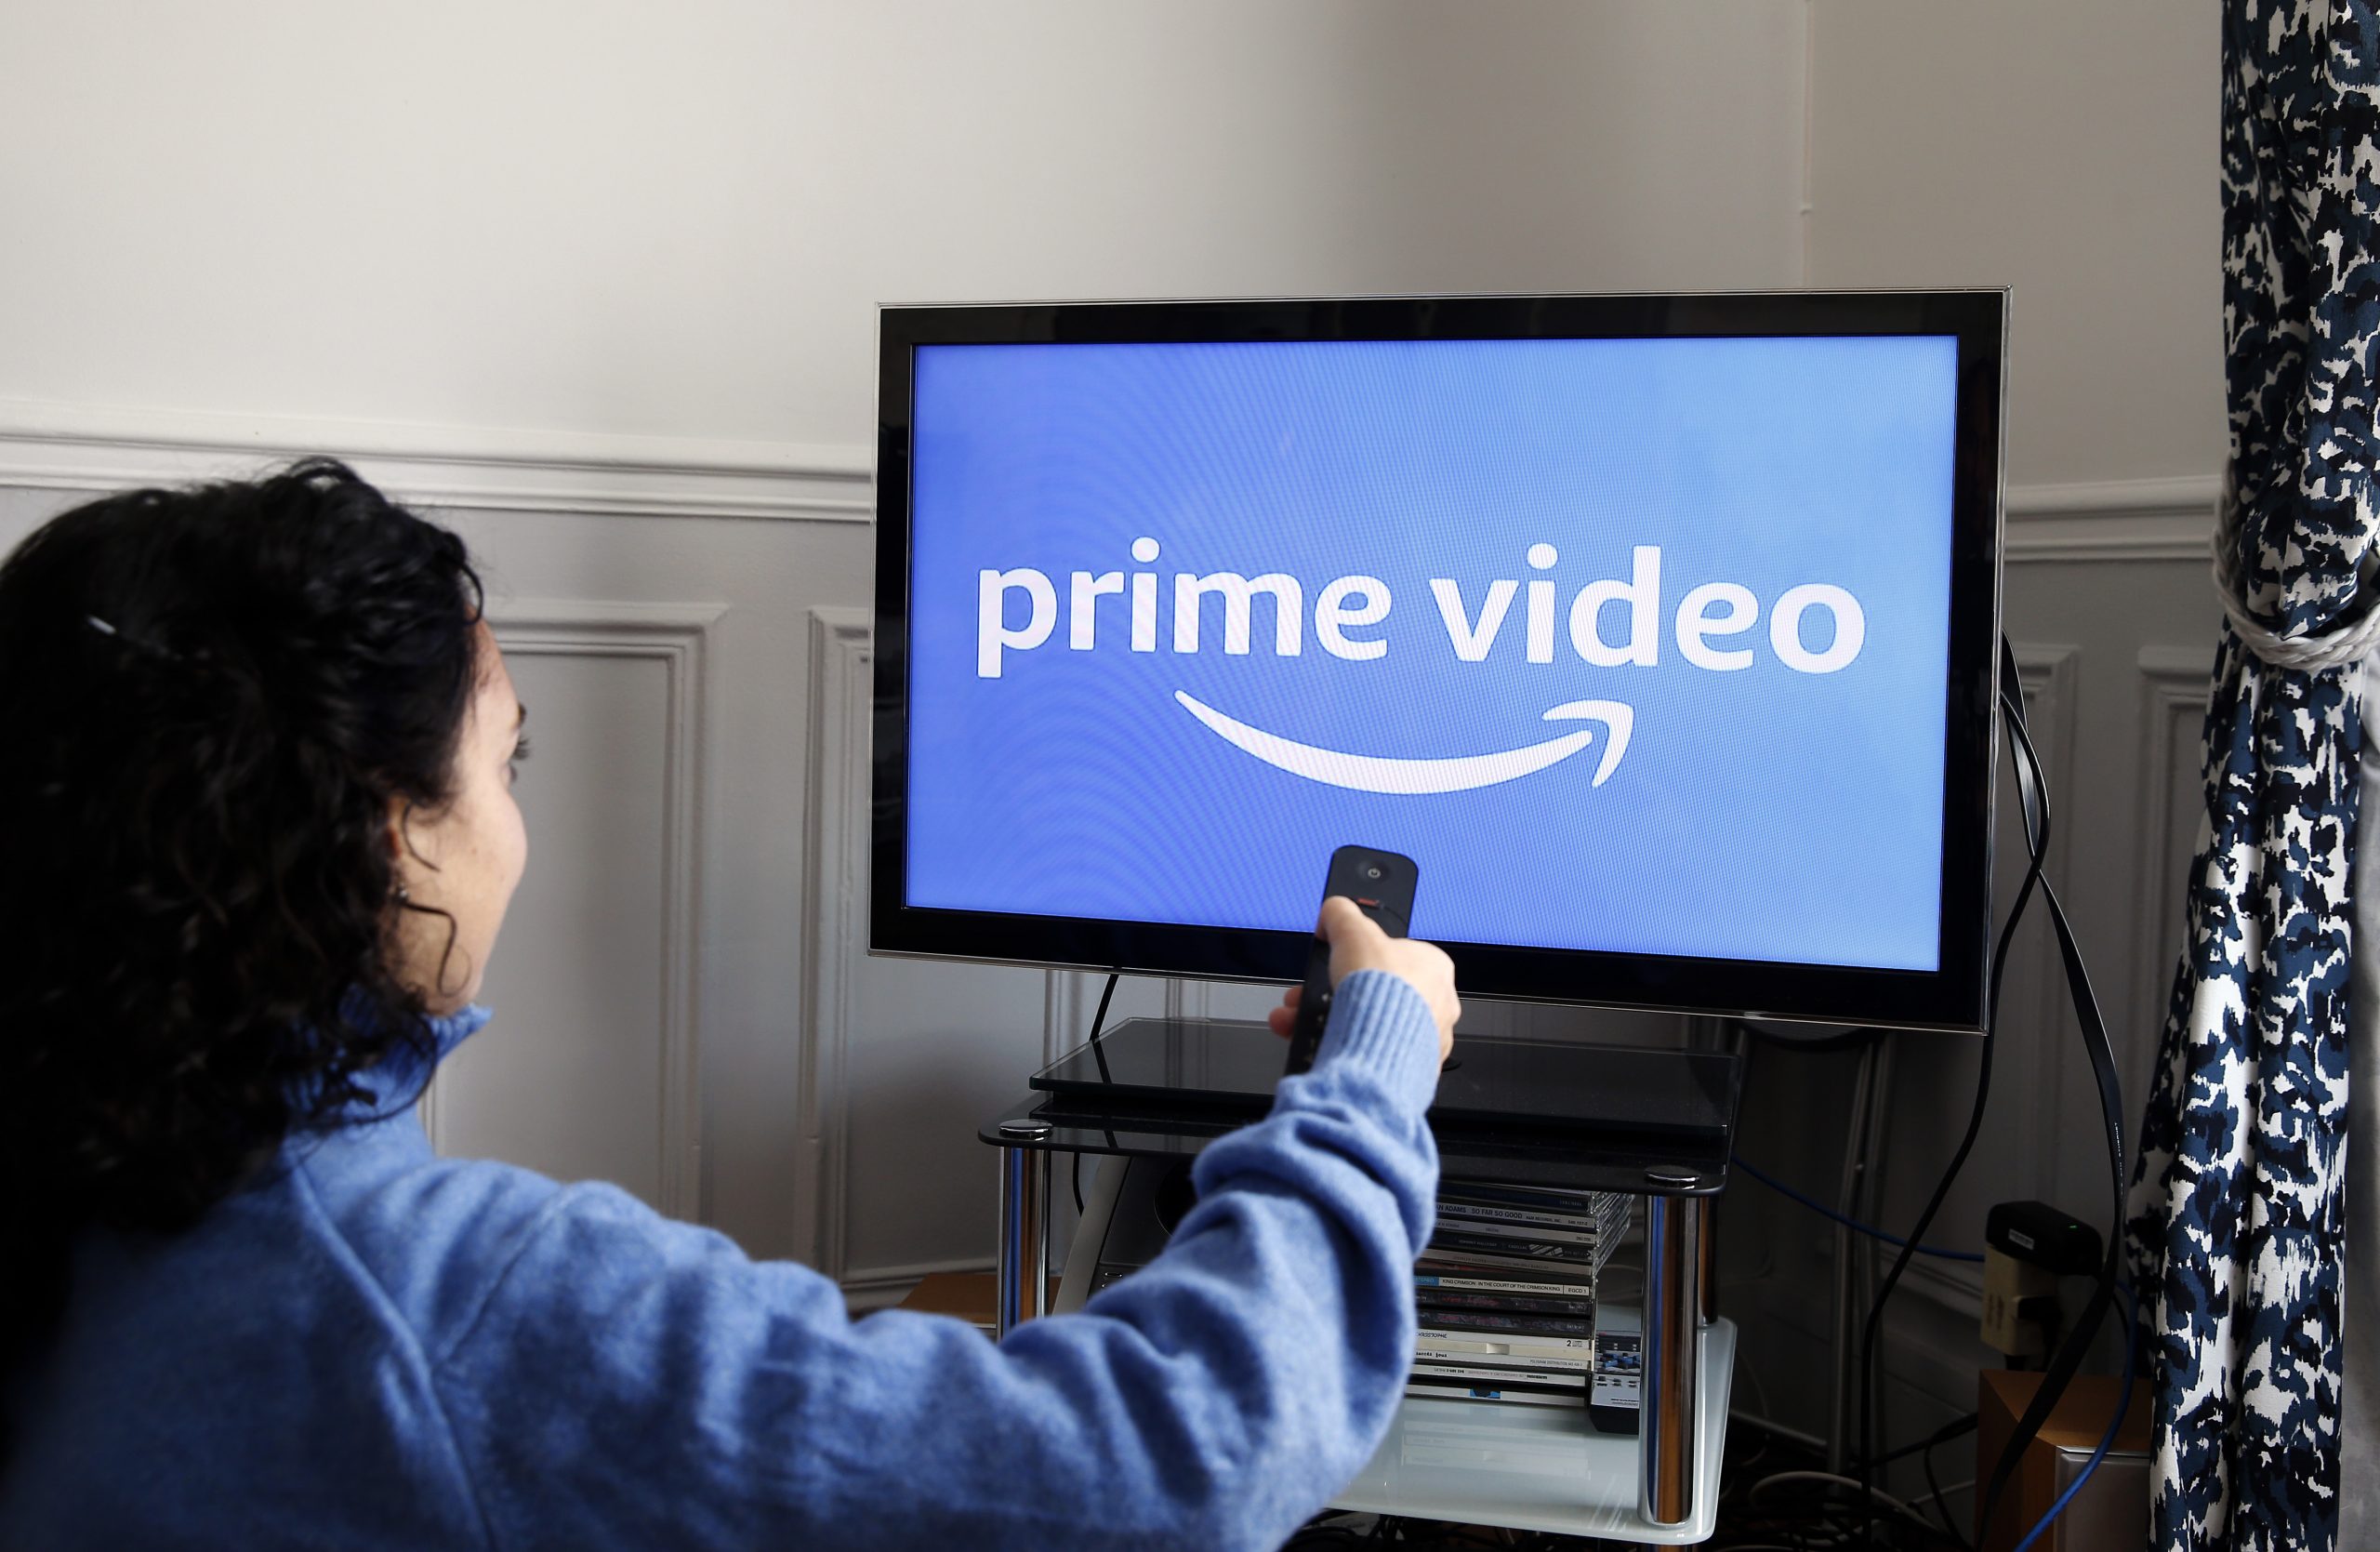 They come up with big plans!  Here's what's coming to Amazon Prime Video in 2021